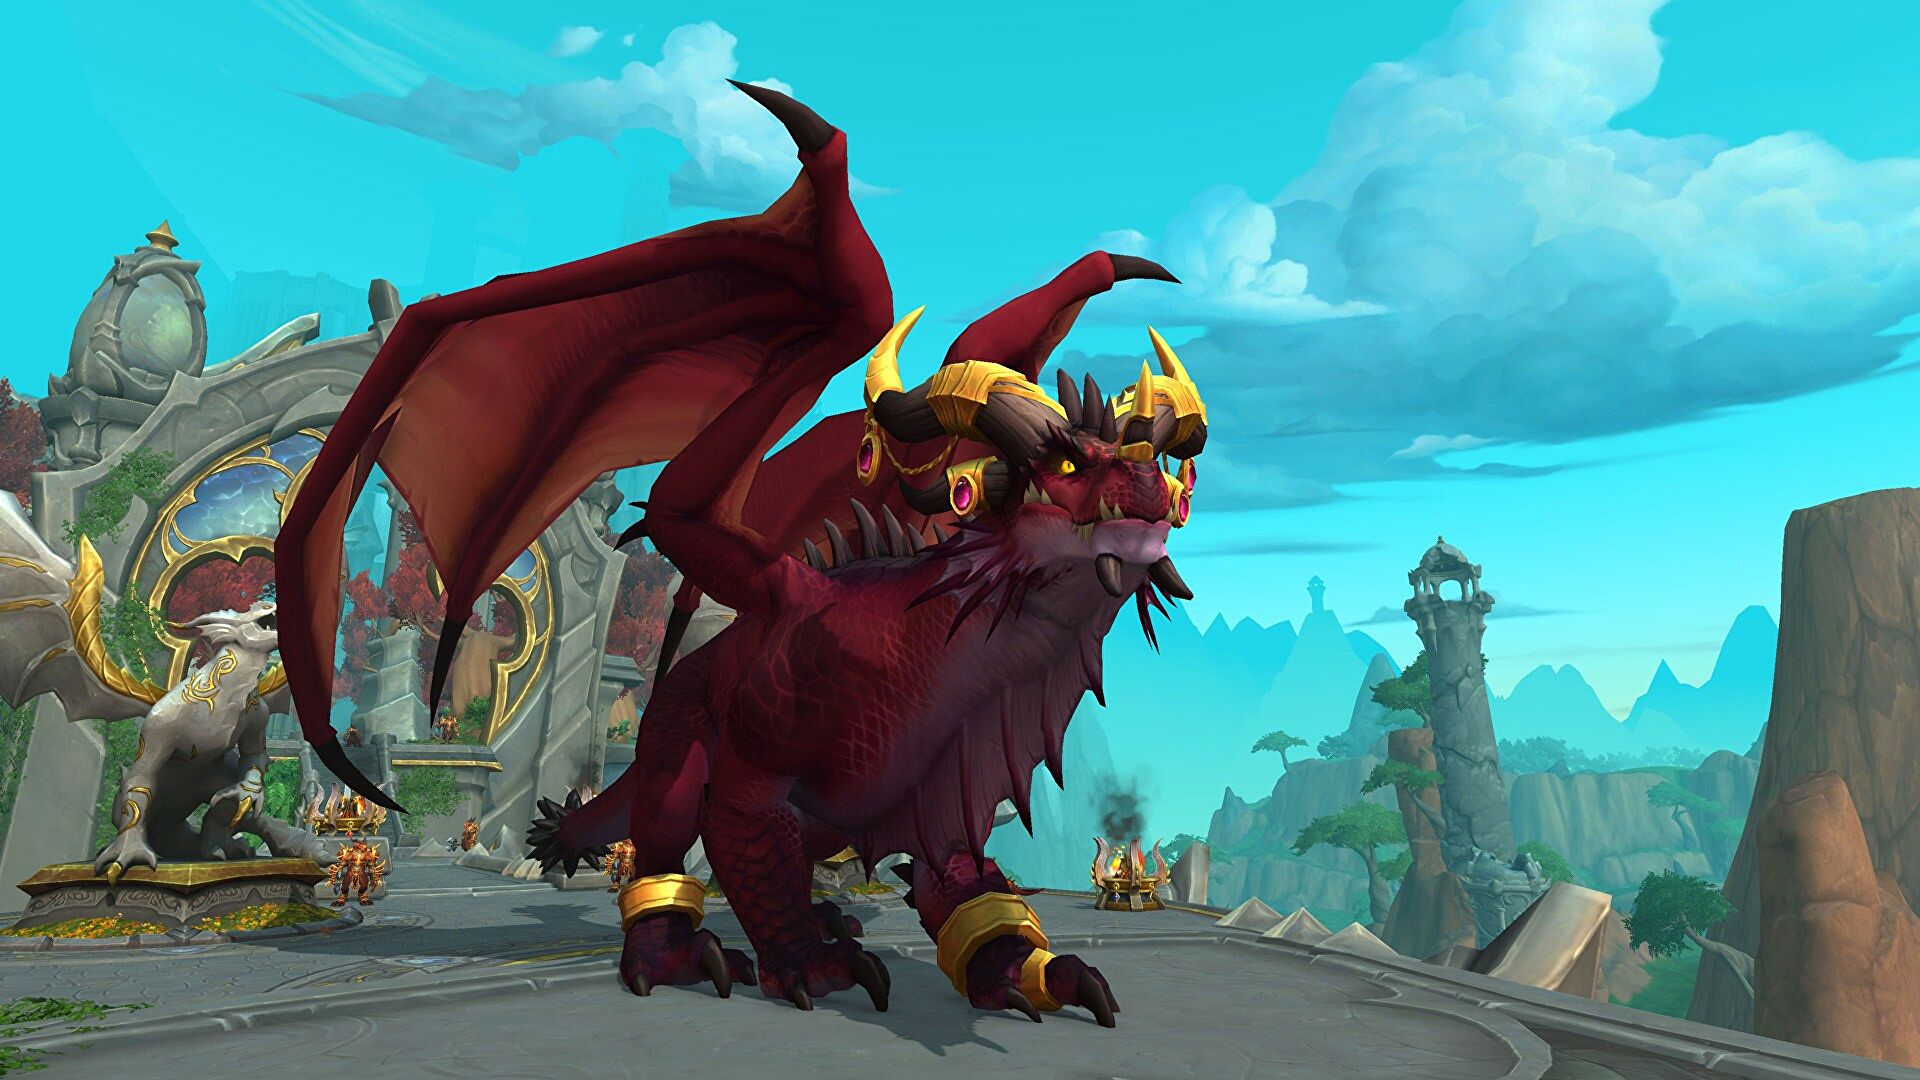 World of Warcraft's next expansion is Dragonflight, has plenty of dragons